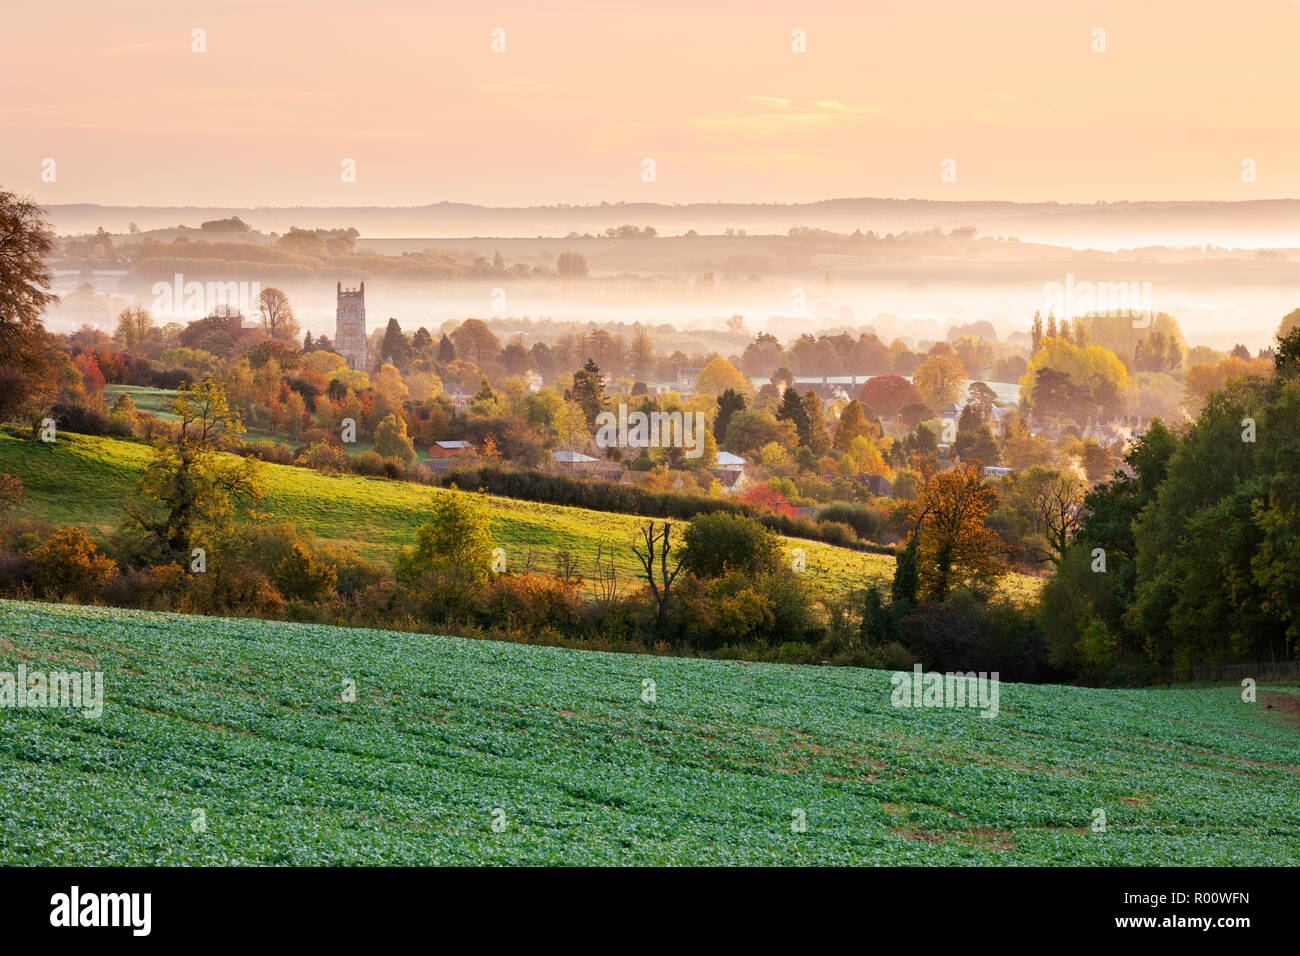 St James' church and misty autumnal cotswold landscape at sunset, Chipping Campden, Cotswolds, Gloucestershire, England, United Kingdom, Europe Stock Photo